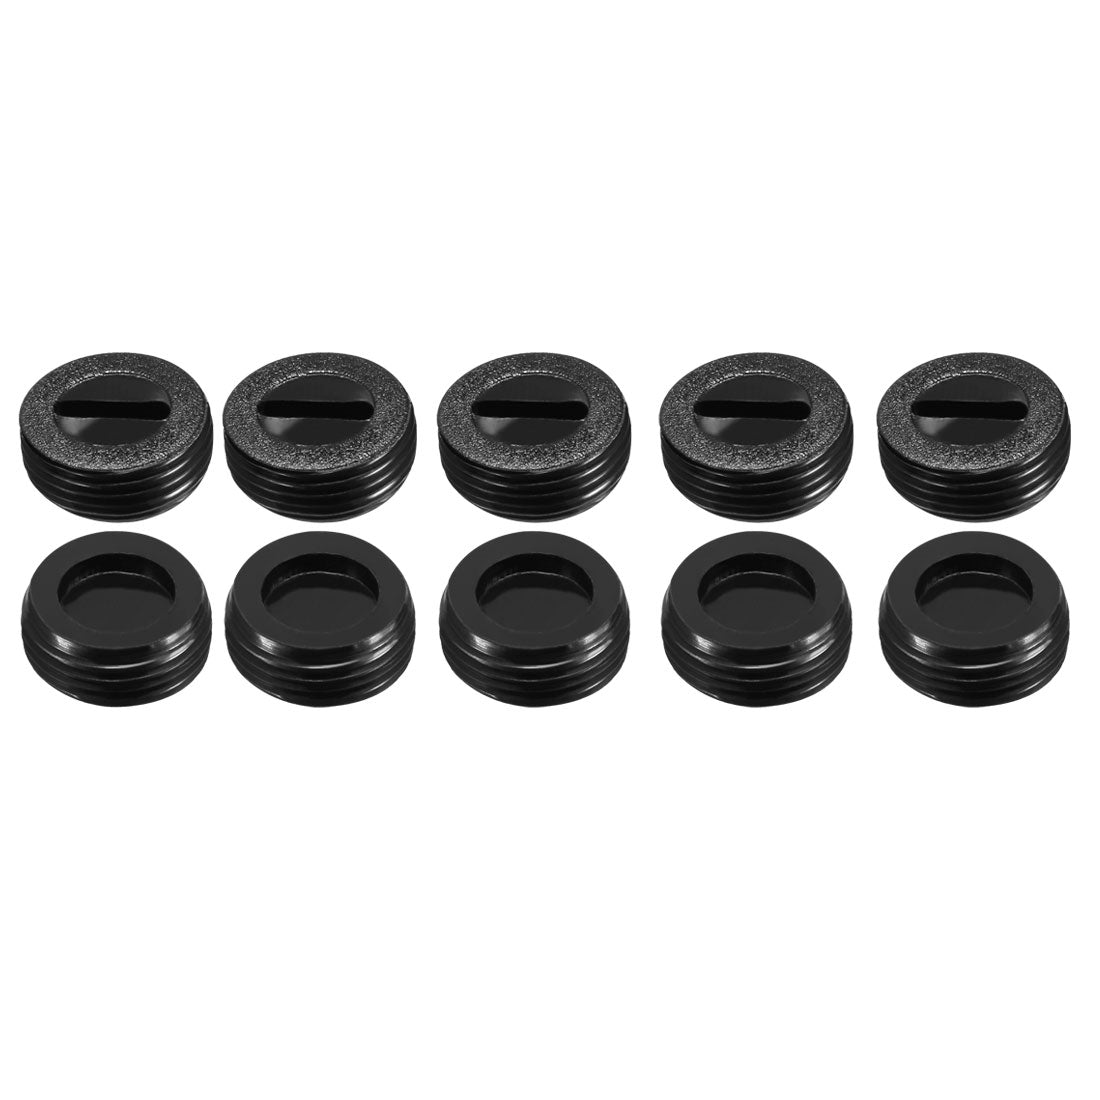 uxcell Uxcell Carbon Brush Holder Caps 13mm O.D. 7.5mm I.D. 5.2mm Thickness Motor Brush Cover Plastic Fitting Thread Black 10pcs